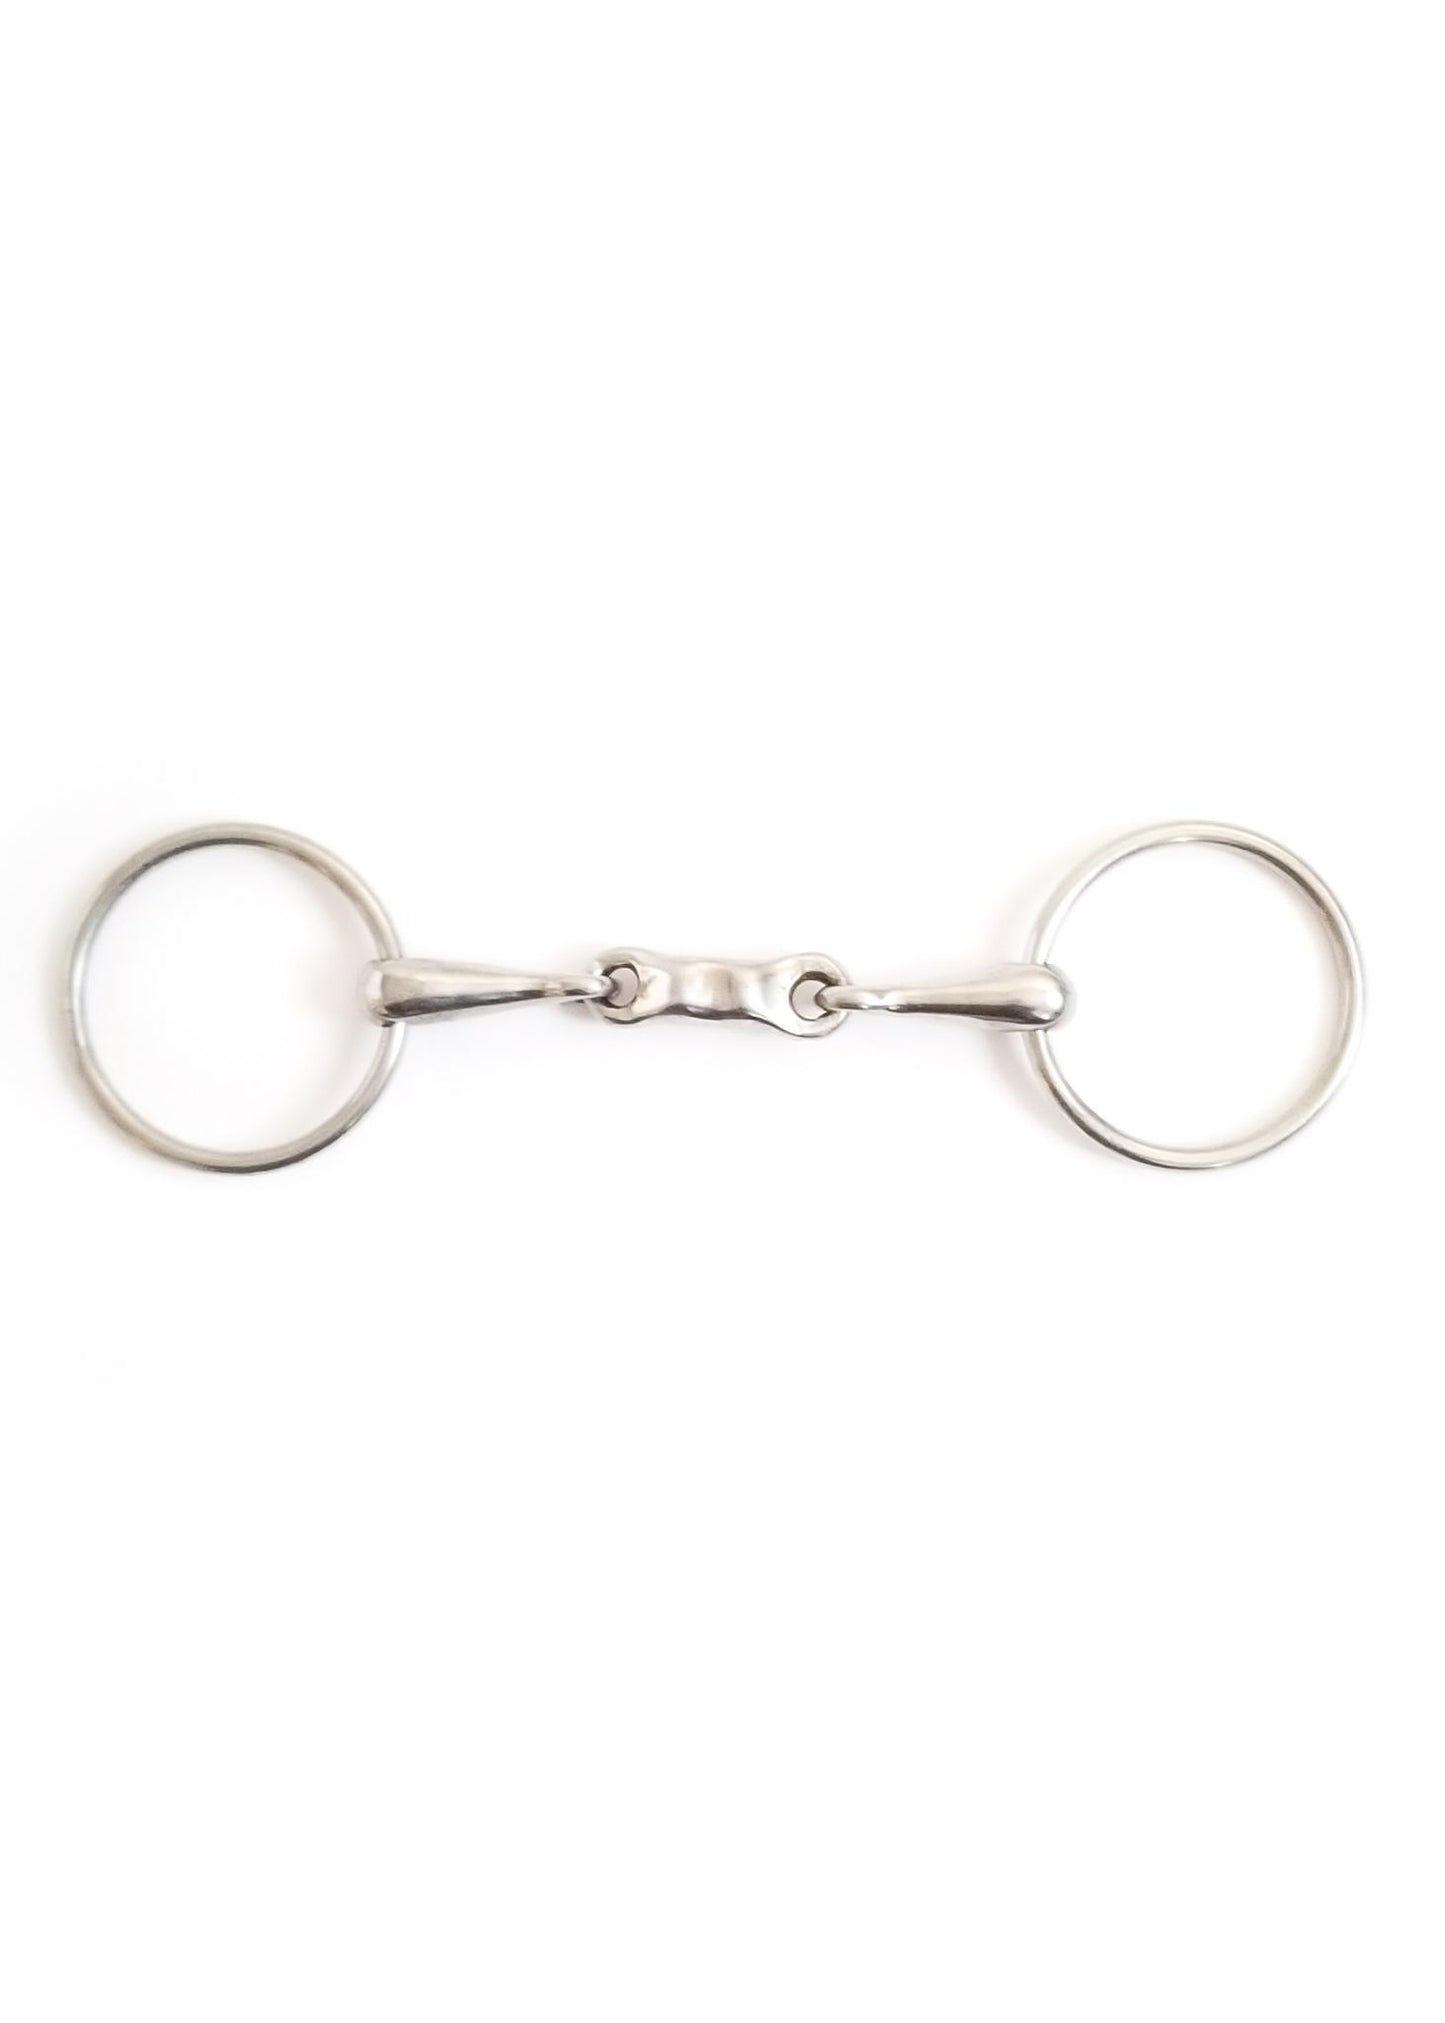 Loose Ring French Link Snaffle - 5.5"